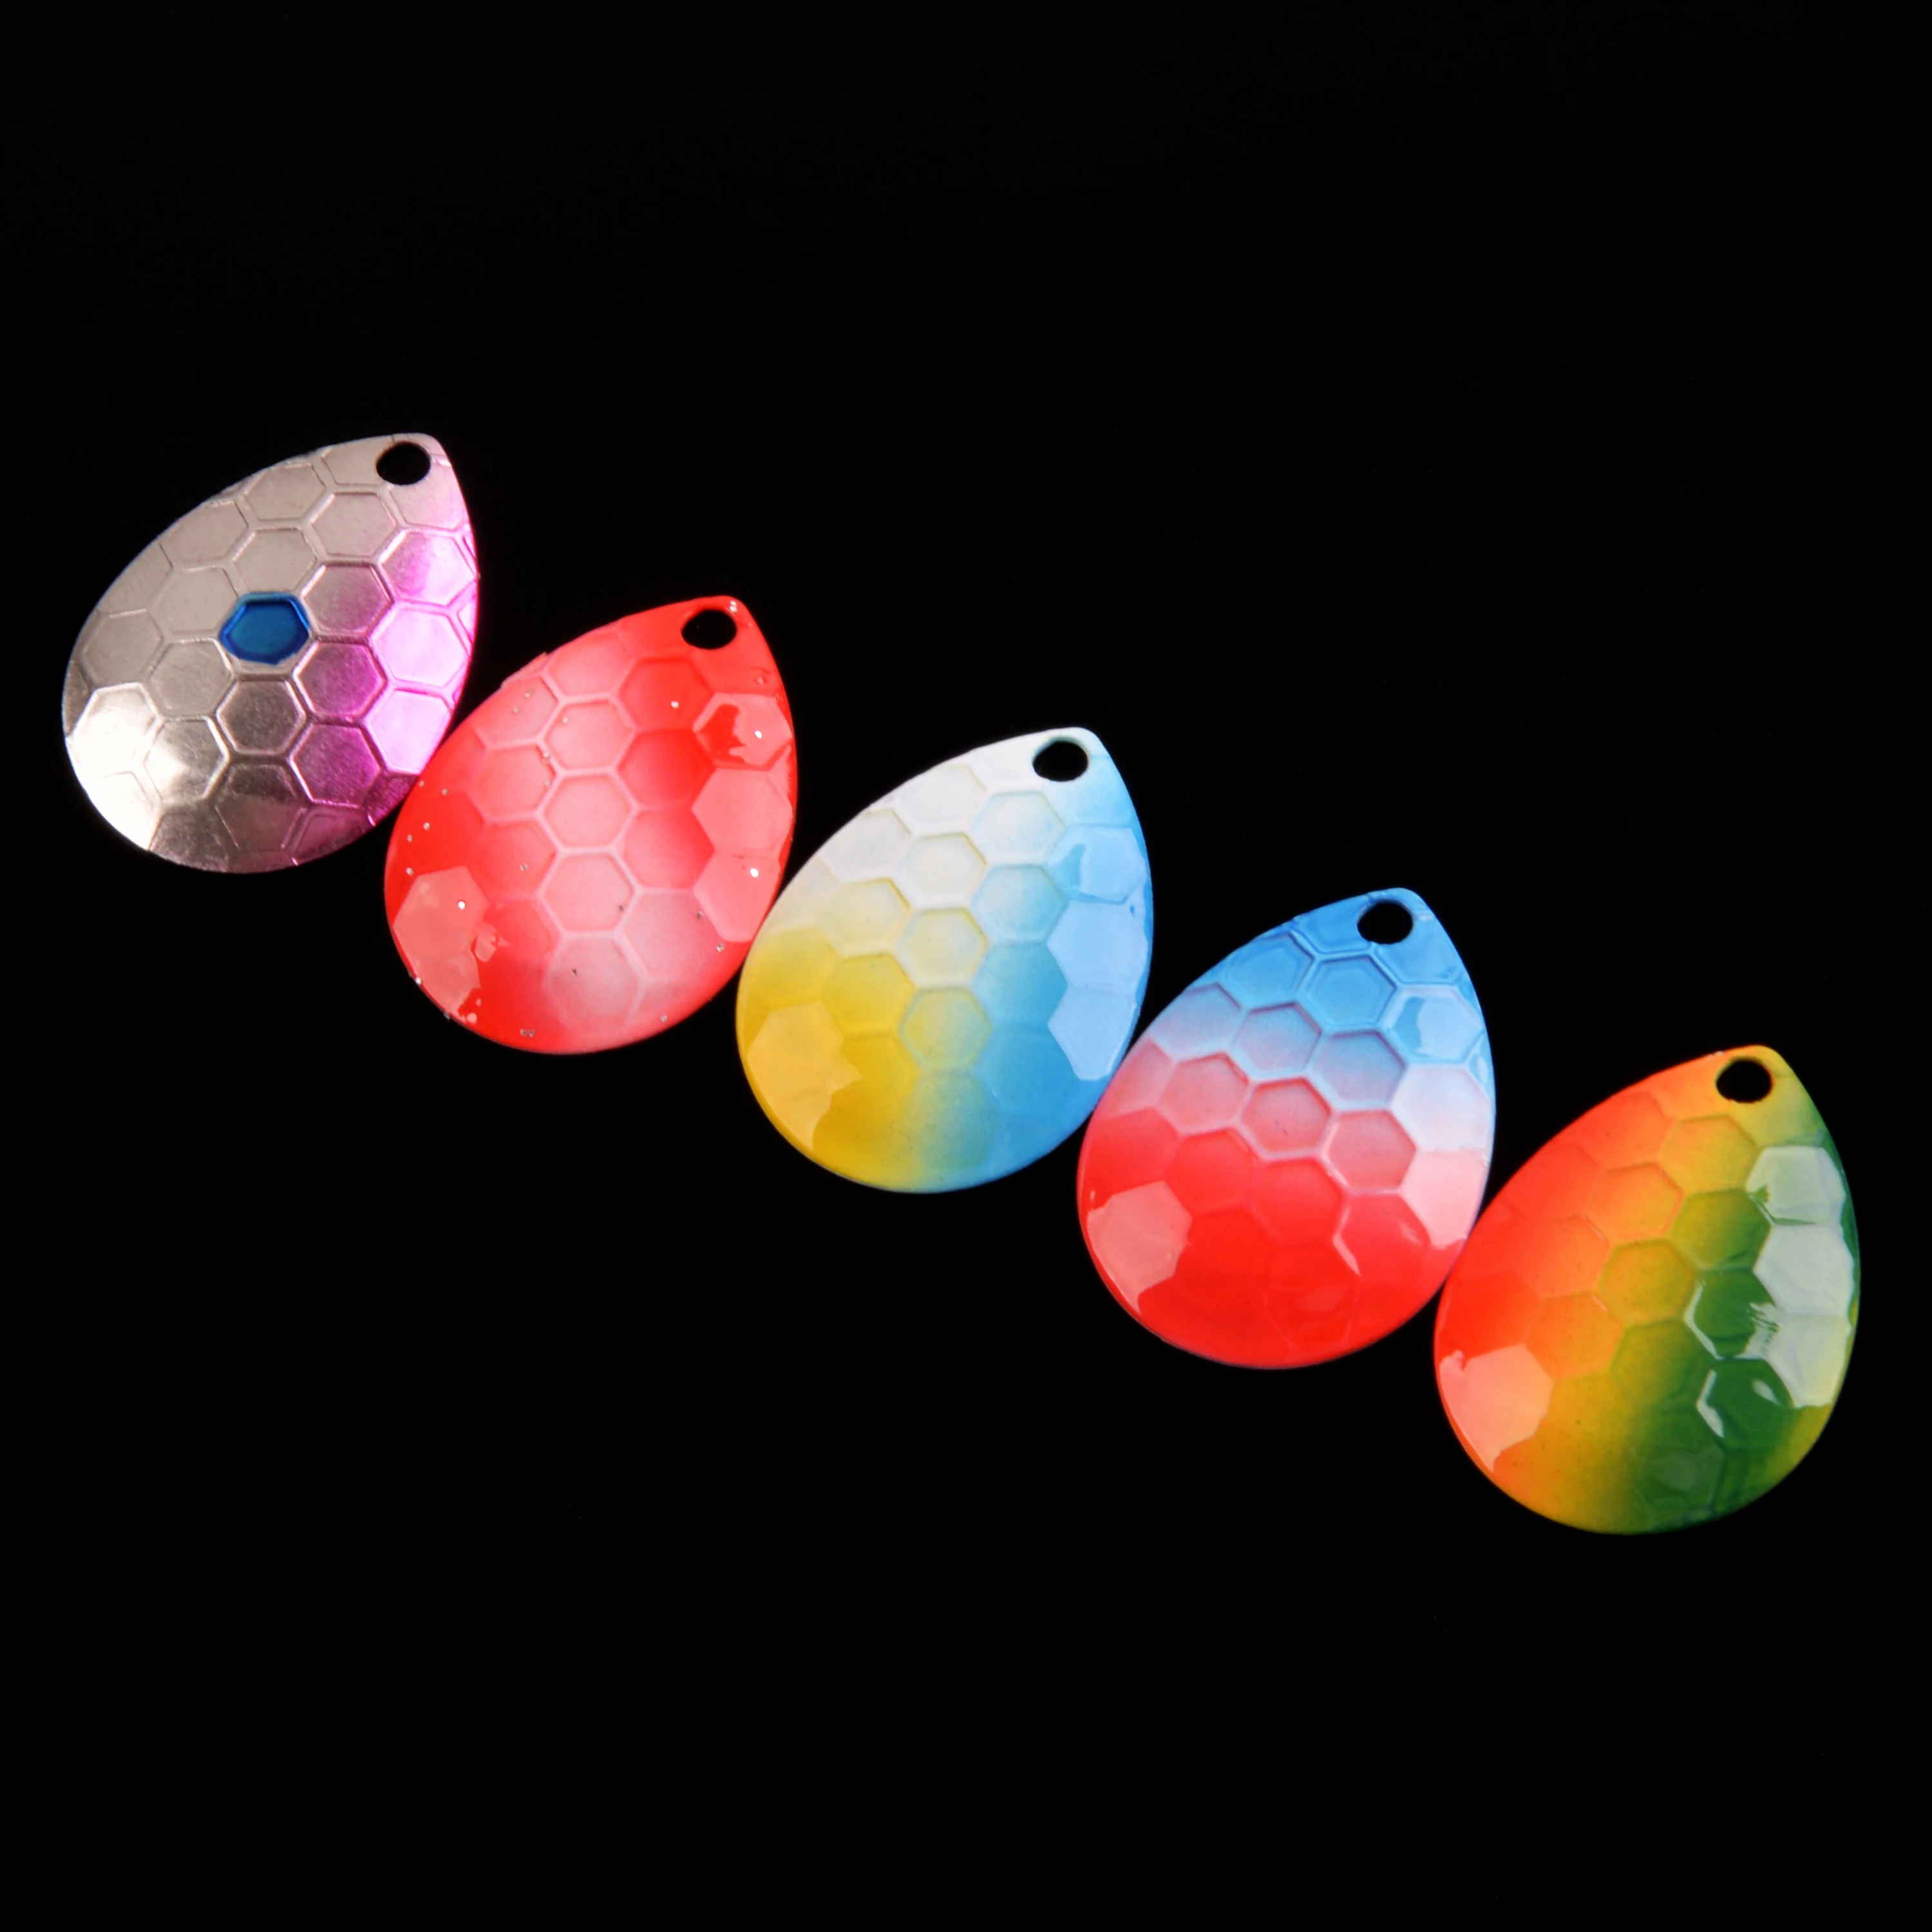 https://ae01.alicdn.com/kf/S86c0e7ee8f384d6784b2ed1773ca41d4q/10PCS-Painted-Colorado-Blades-Metal-Spinner-Blades-Fishing-Lure-Making-Supplies-for-Spinner-Spinnerbaits.jpg